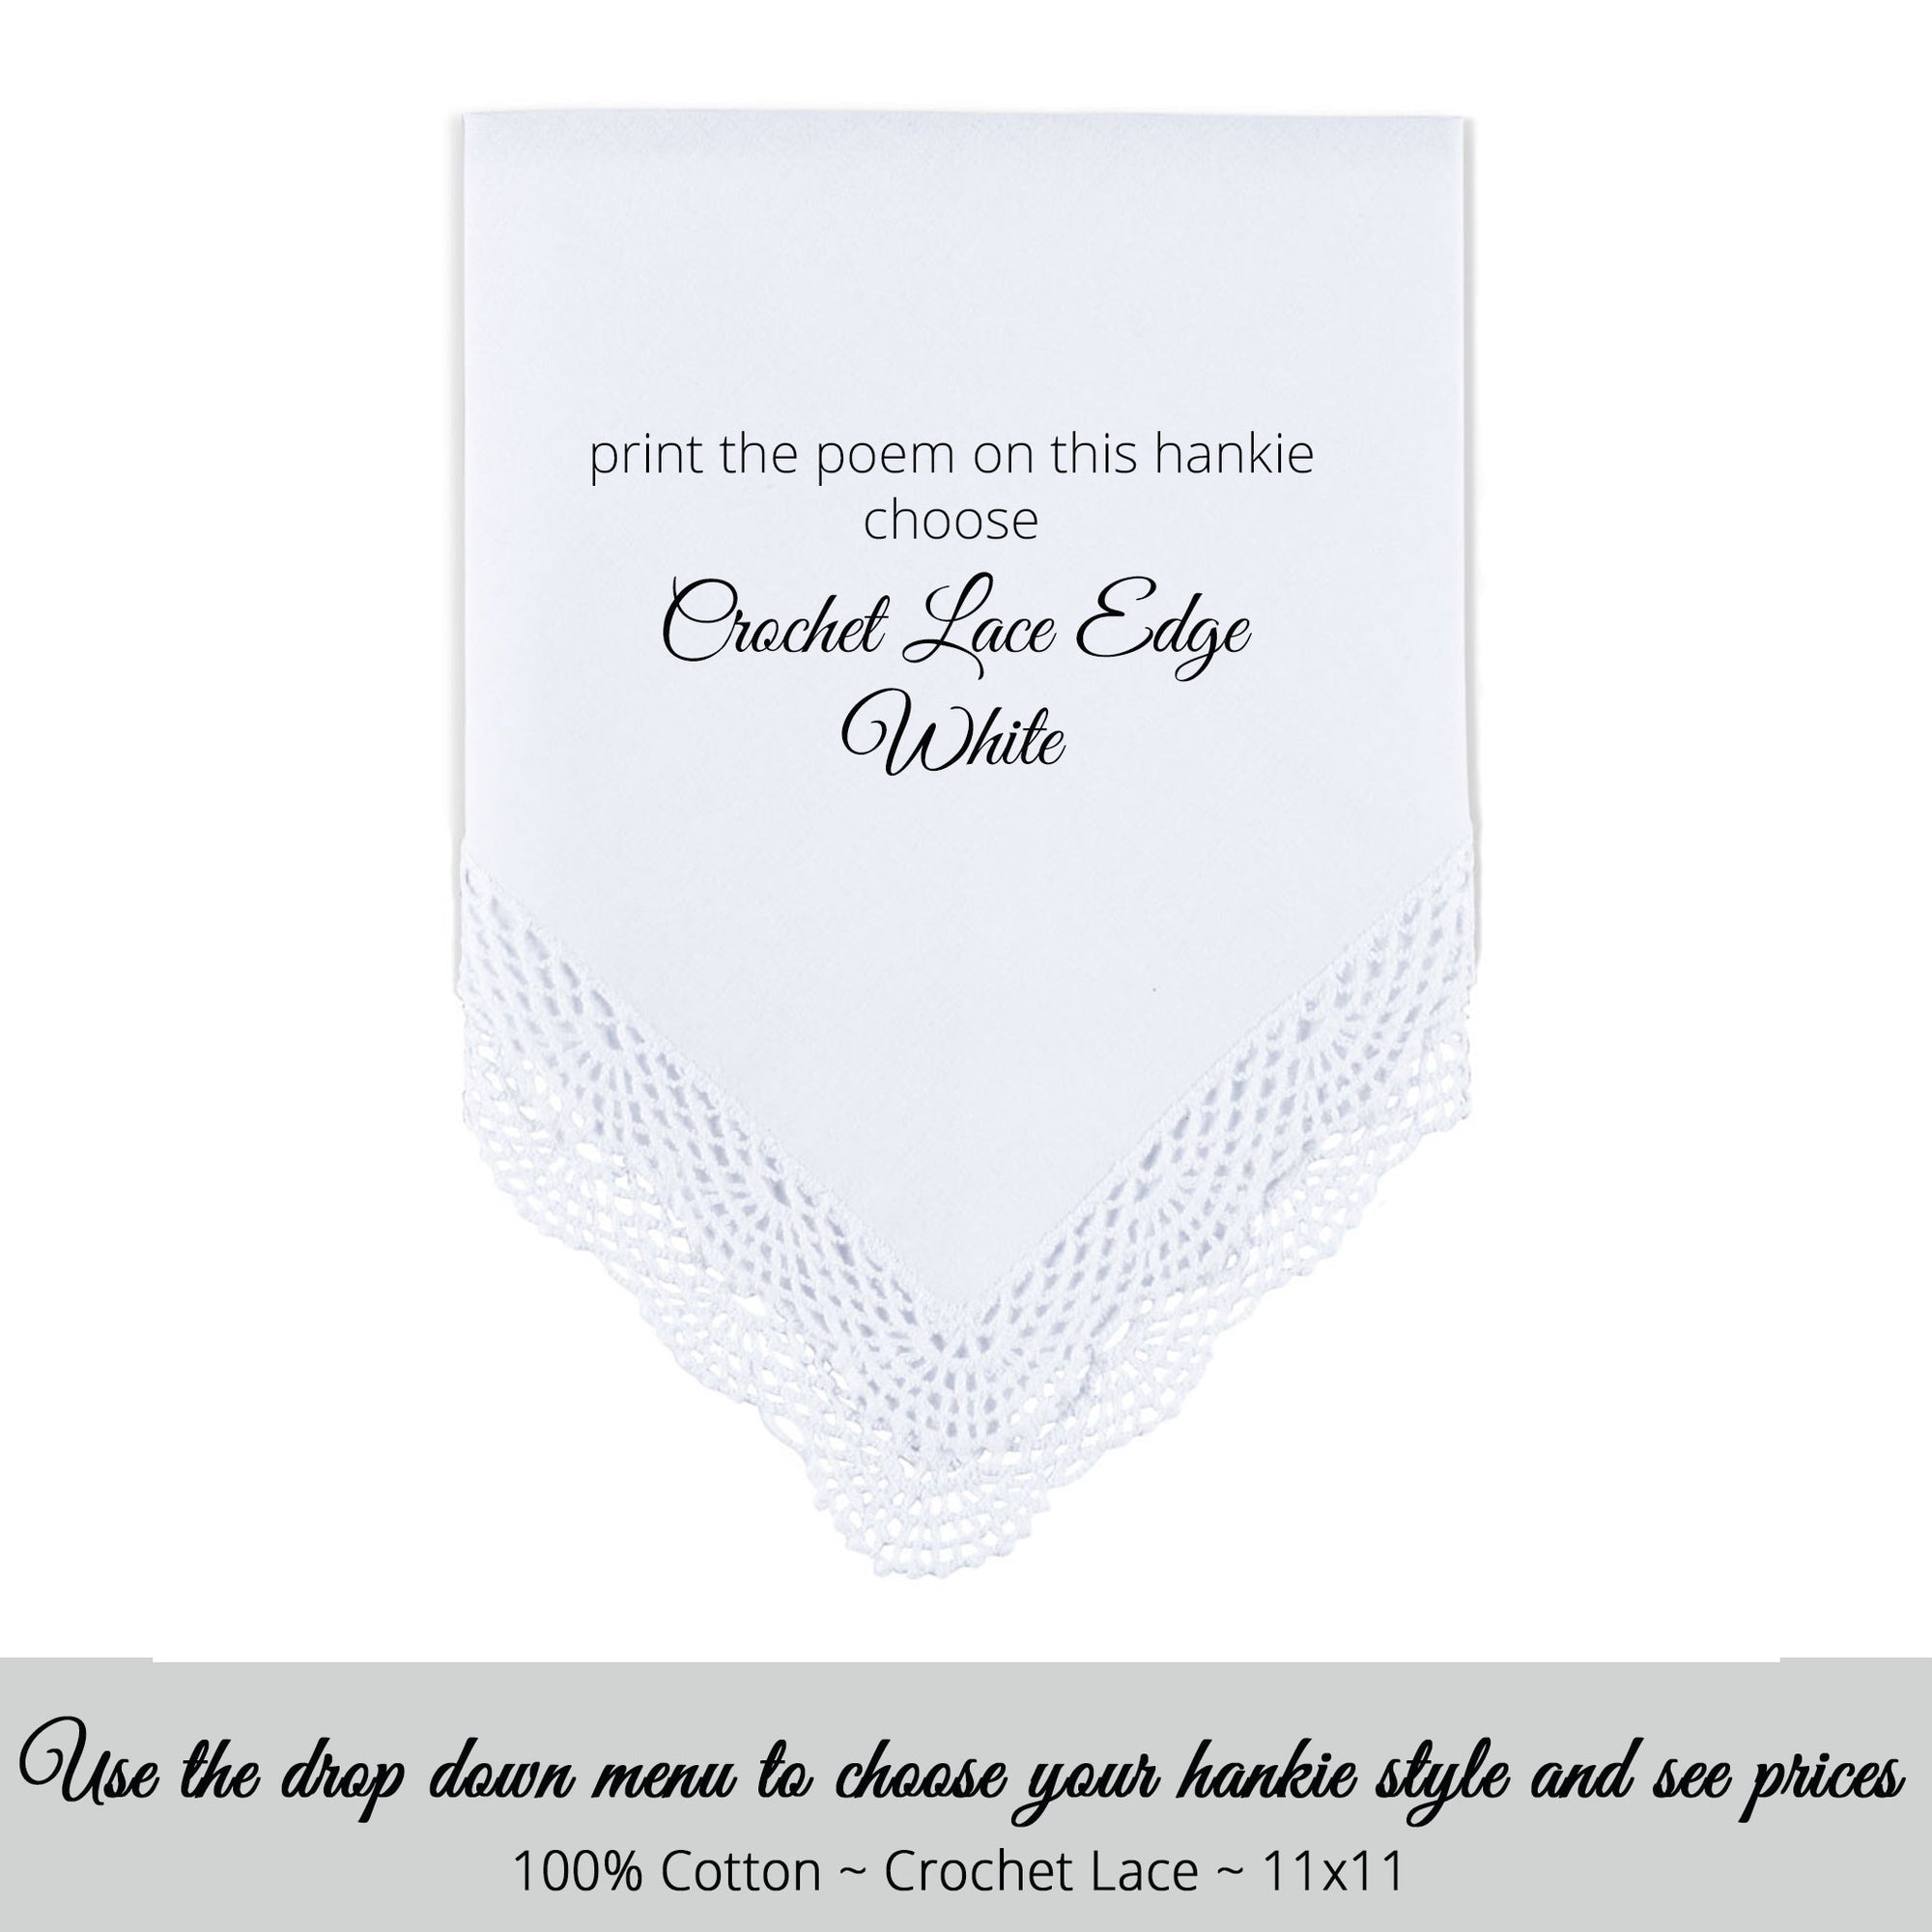 Wedding handkerchief white with crochet lace edge poem printed hankie for the stepmother of the bride